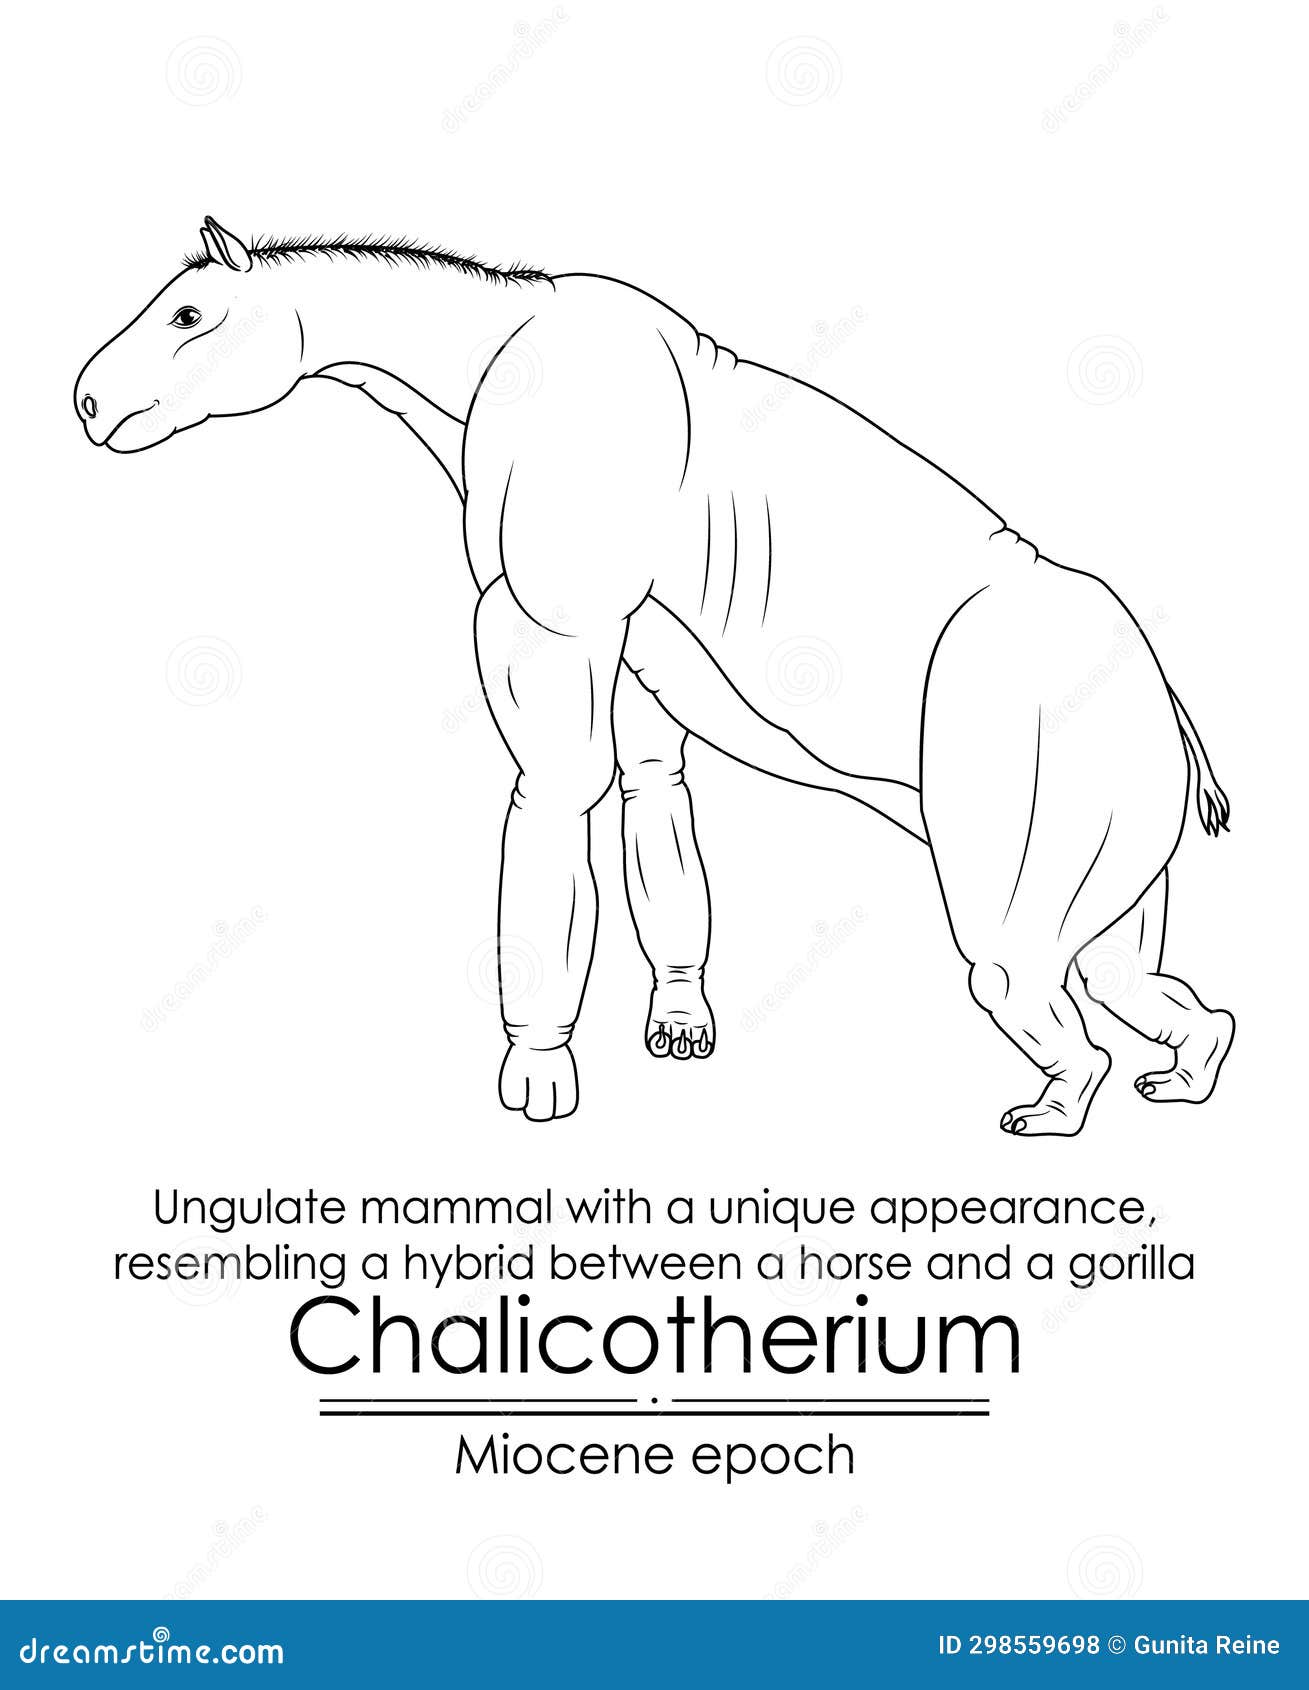 chalicotherium, ungulate mammal with a unique appearance